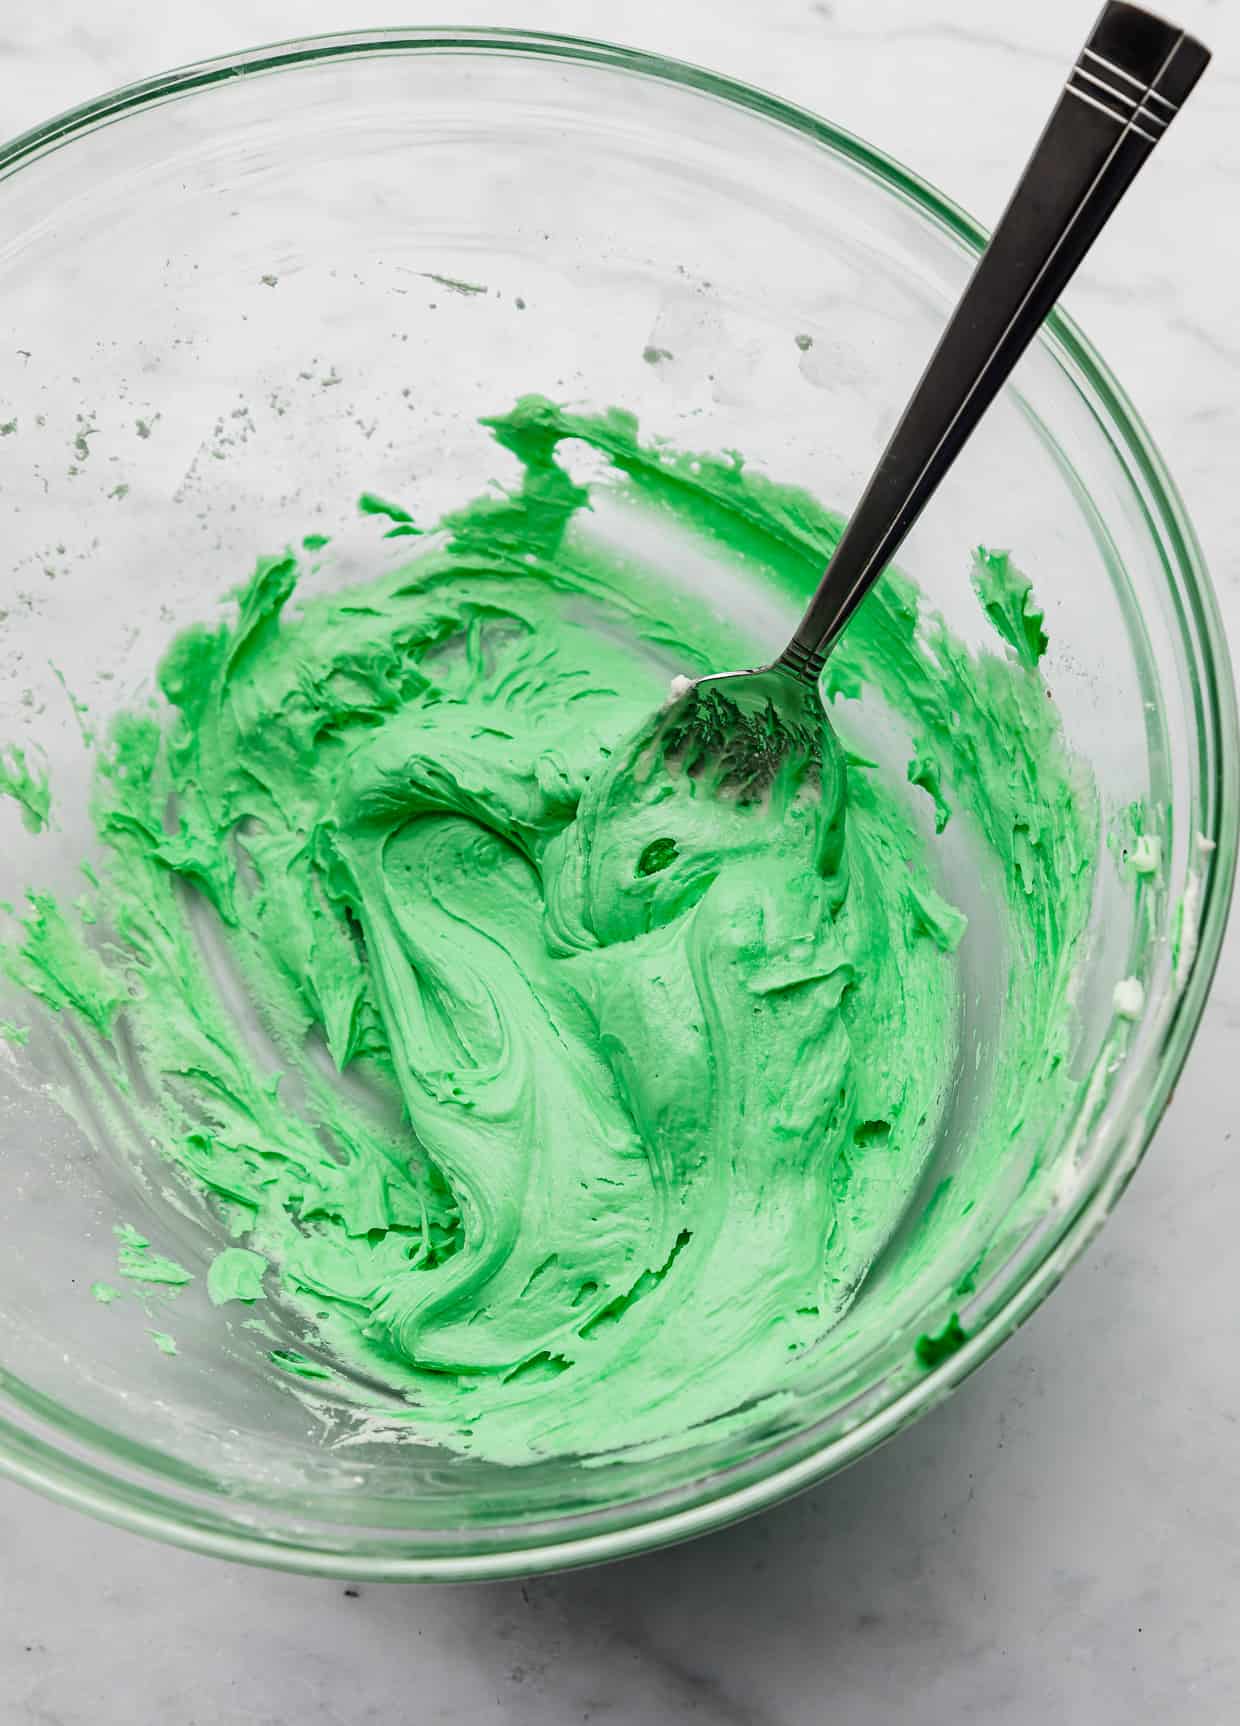 Bright green frosting in a glass bowl.